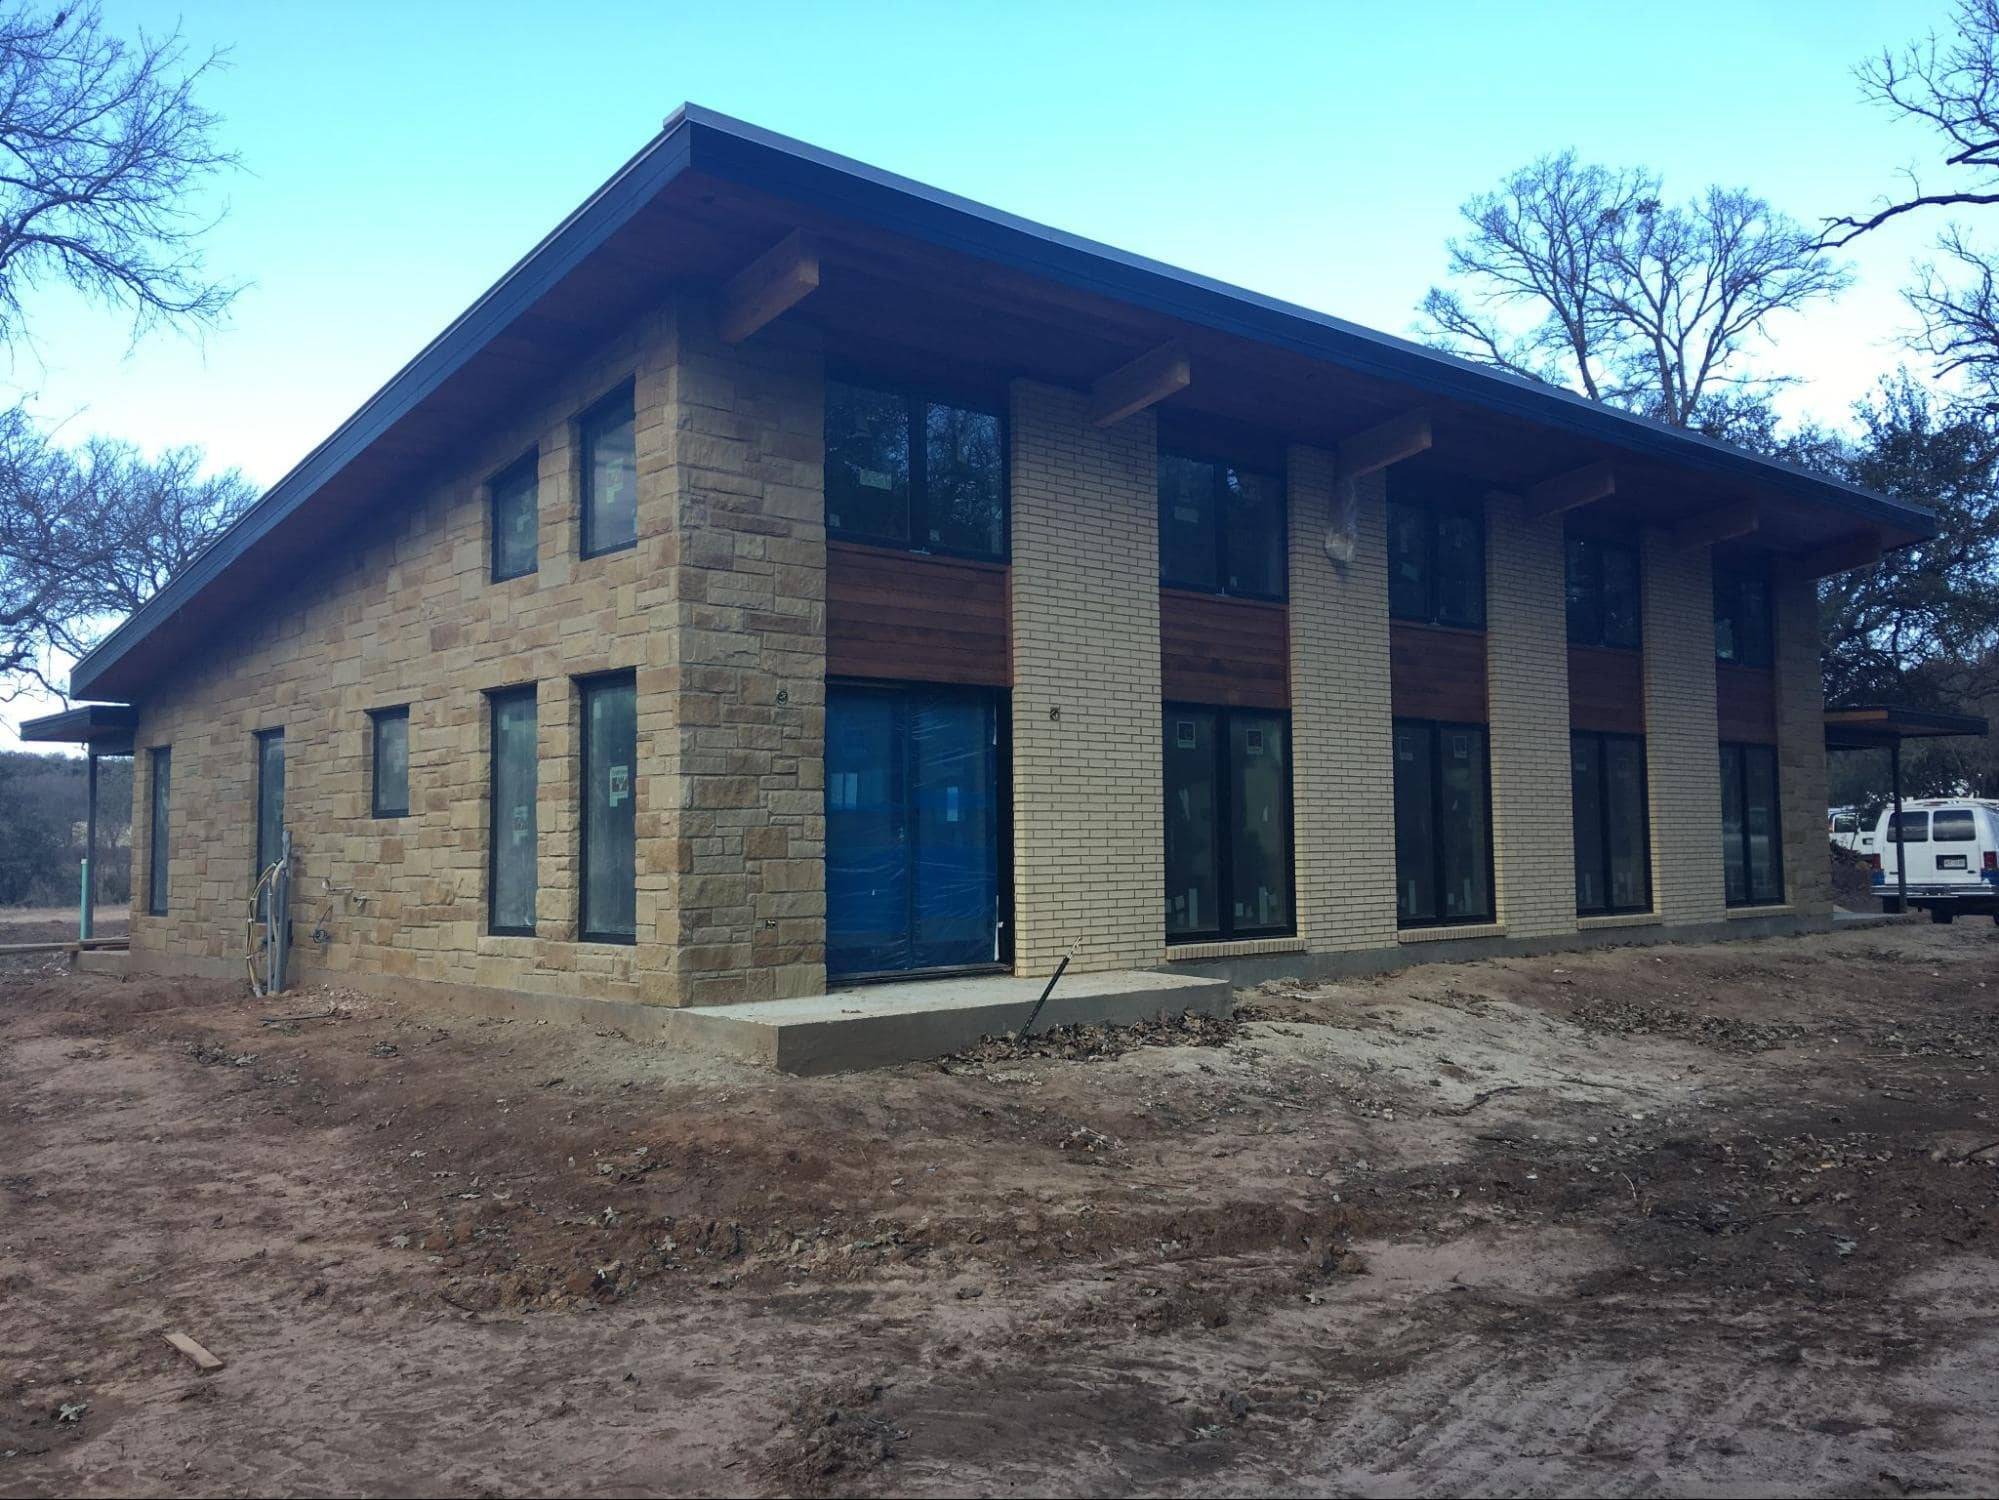 MSH 20180208 texas modern custom stone brick outdoors finished yellow stonework left side front view PX min